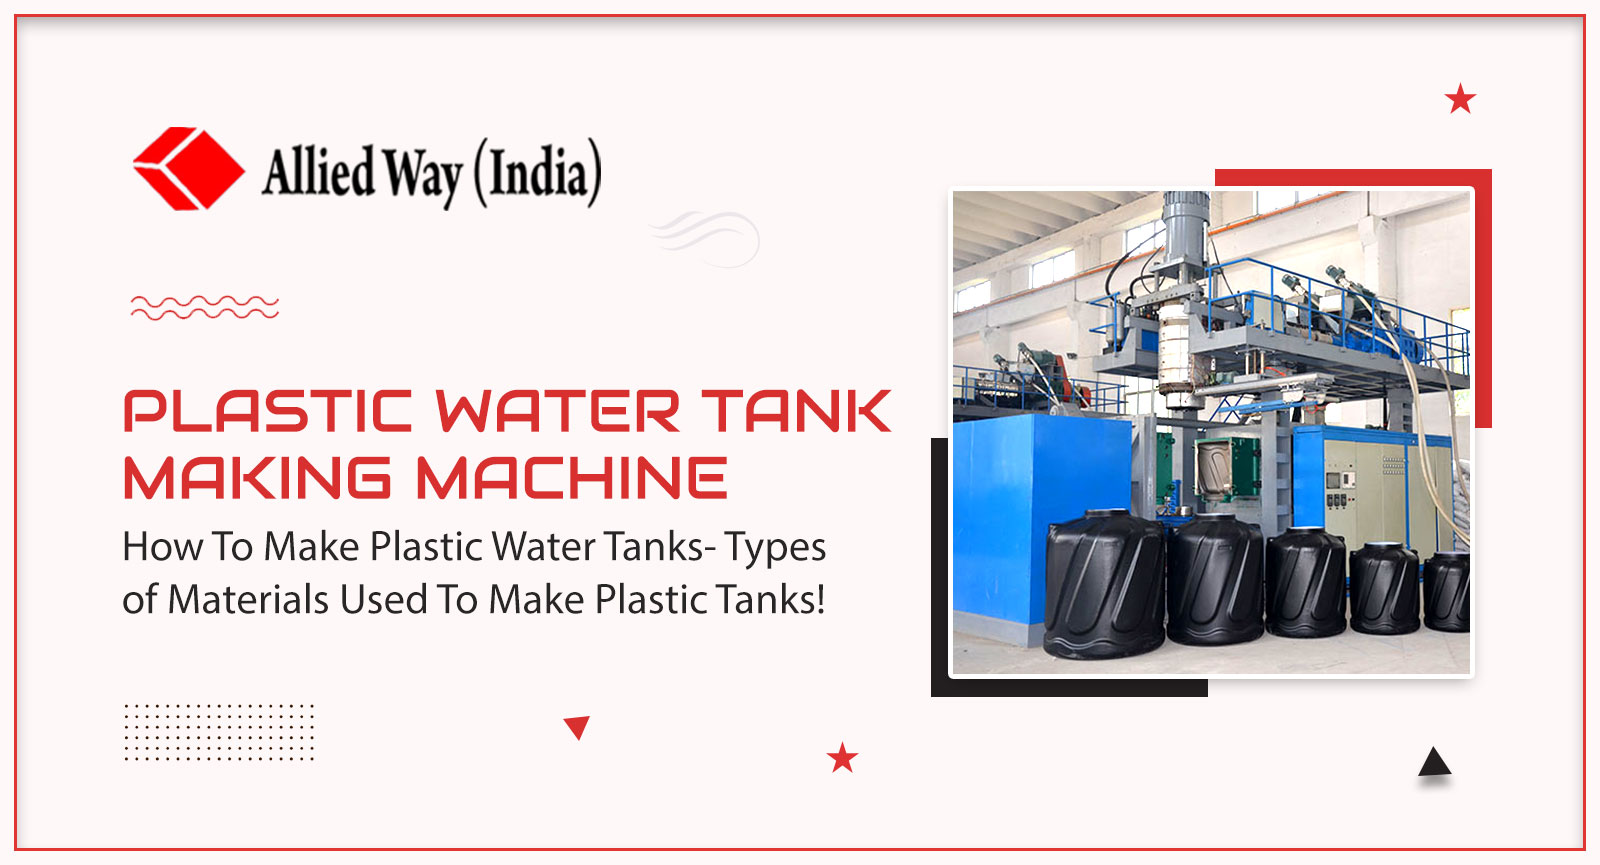 How To Make Plastic Water Tanks- Types of Materials Used To Make Plastic Tanks!, AlliedWay (India)